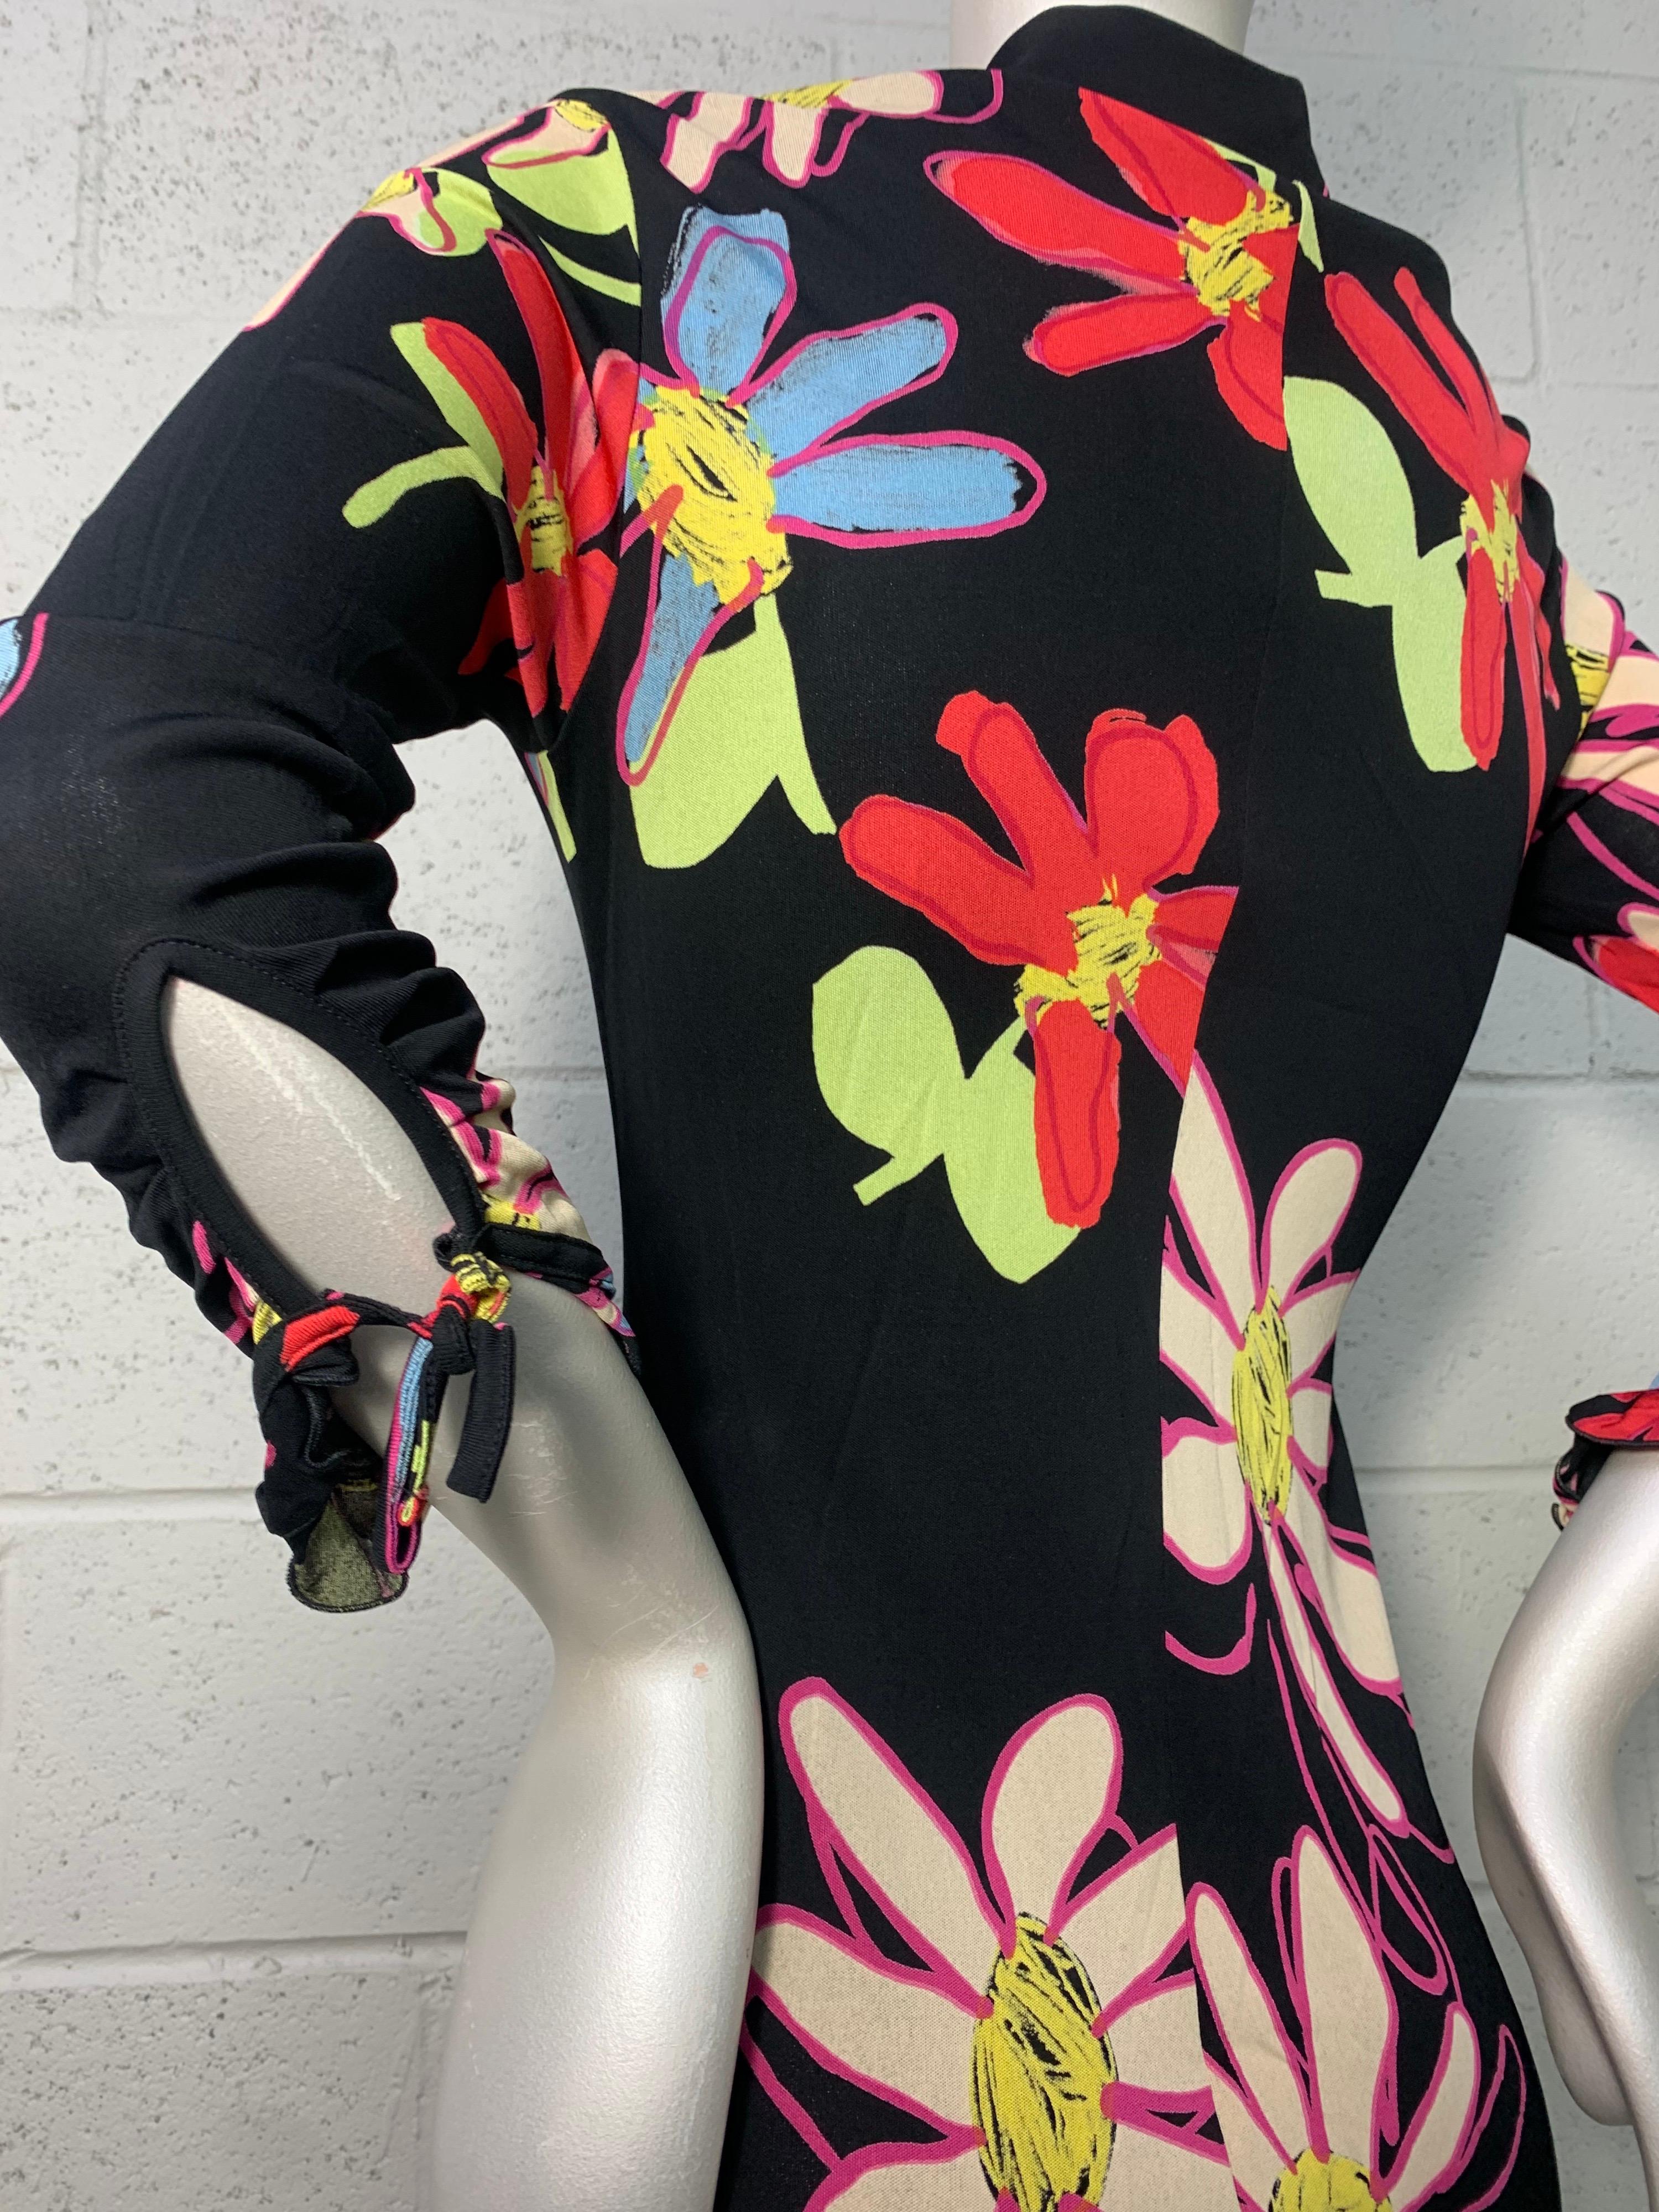 2000 Christian Lacroix Bias Cut 1930s-Inspired Rayon Jersey Floral Print Dress In Excellent Condition For Sale In Gresham, OR